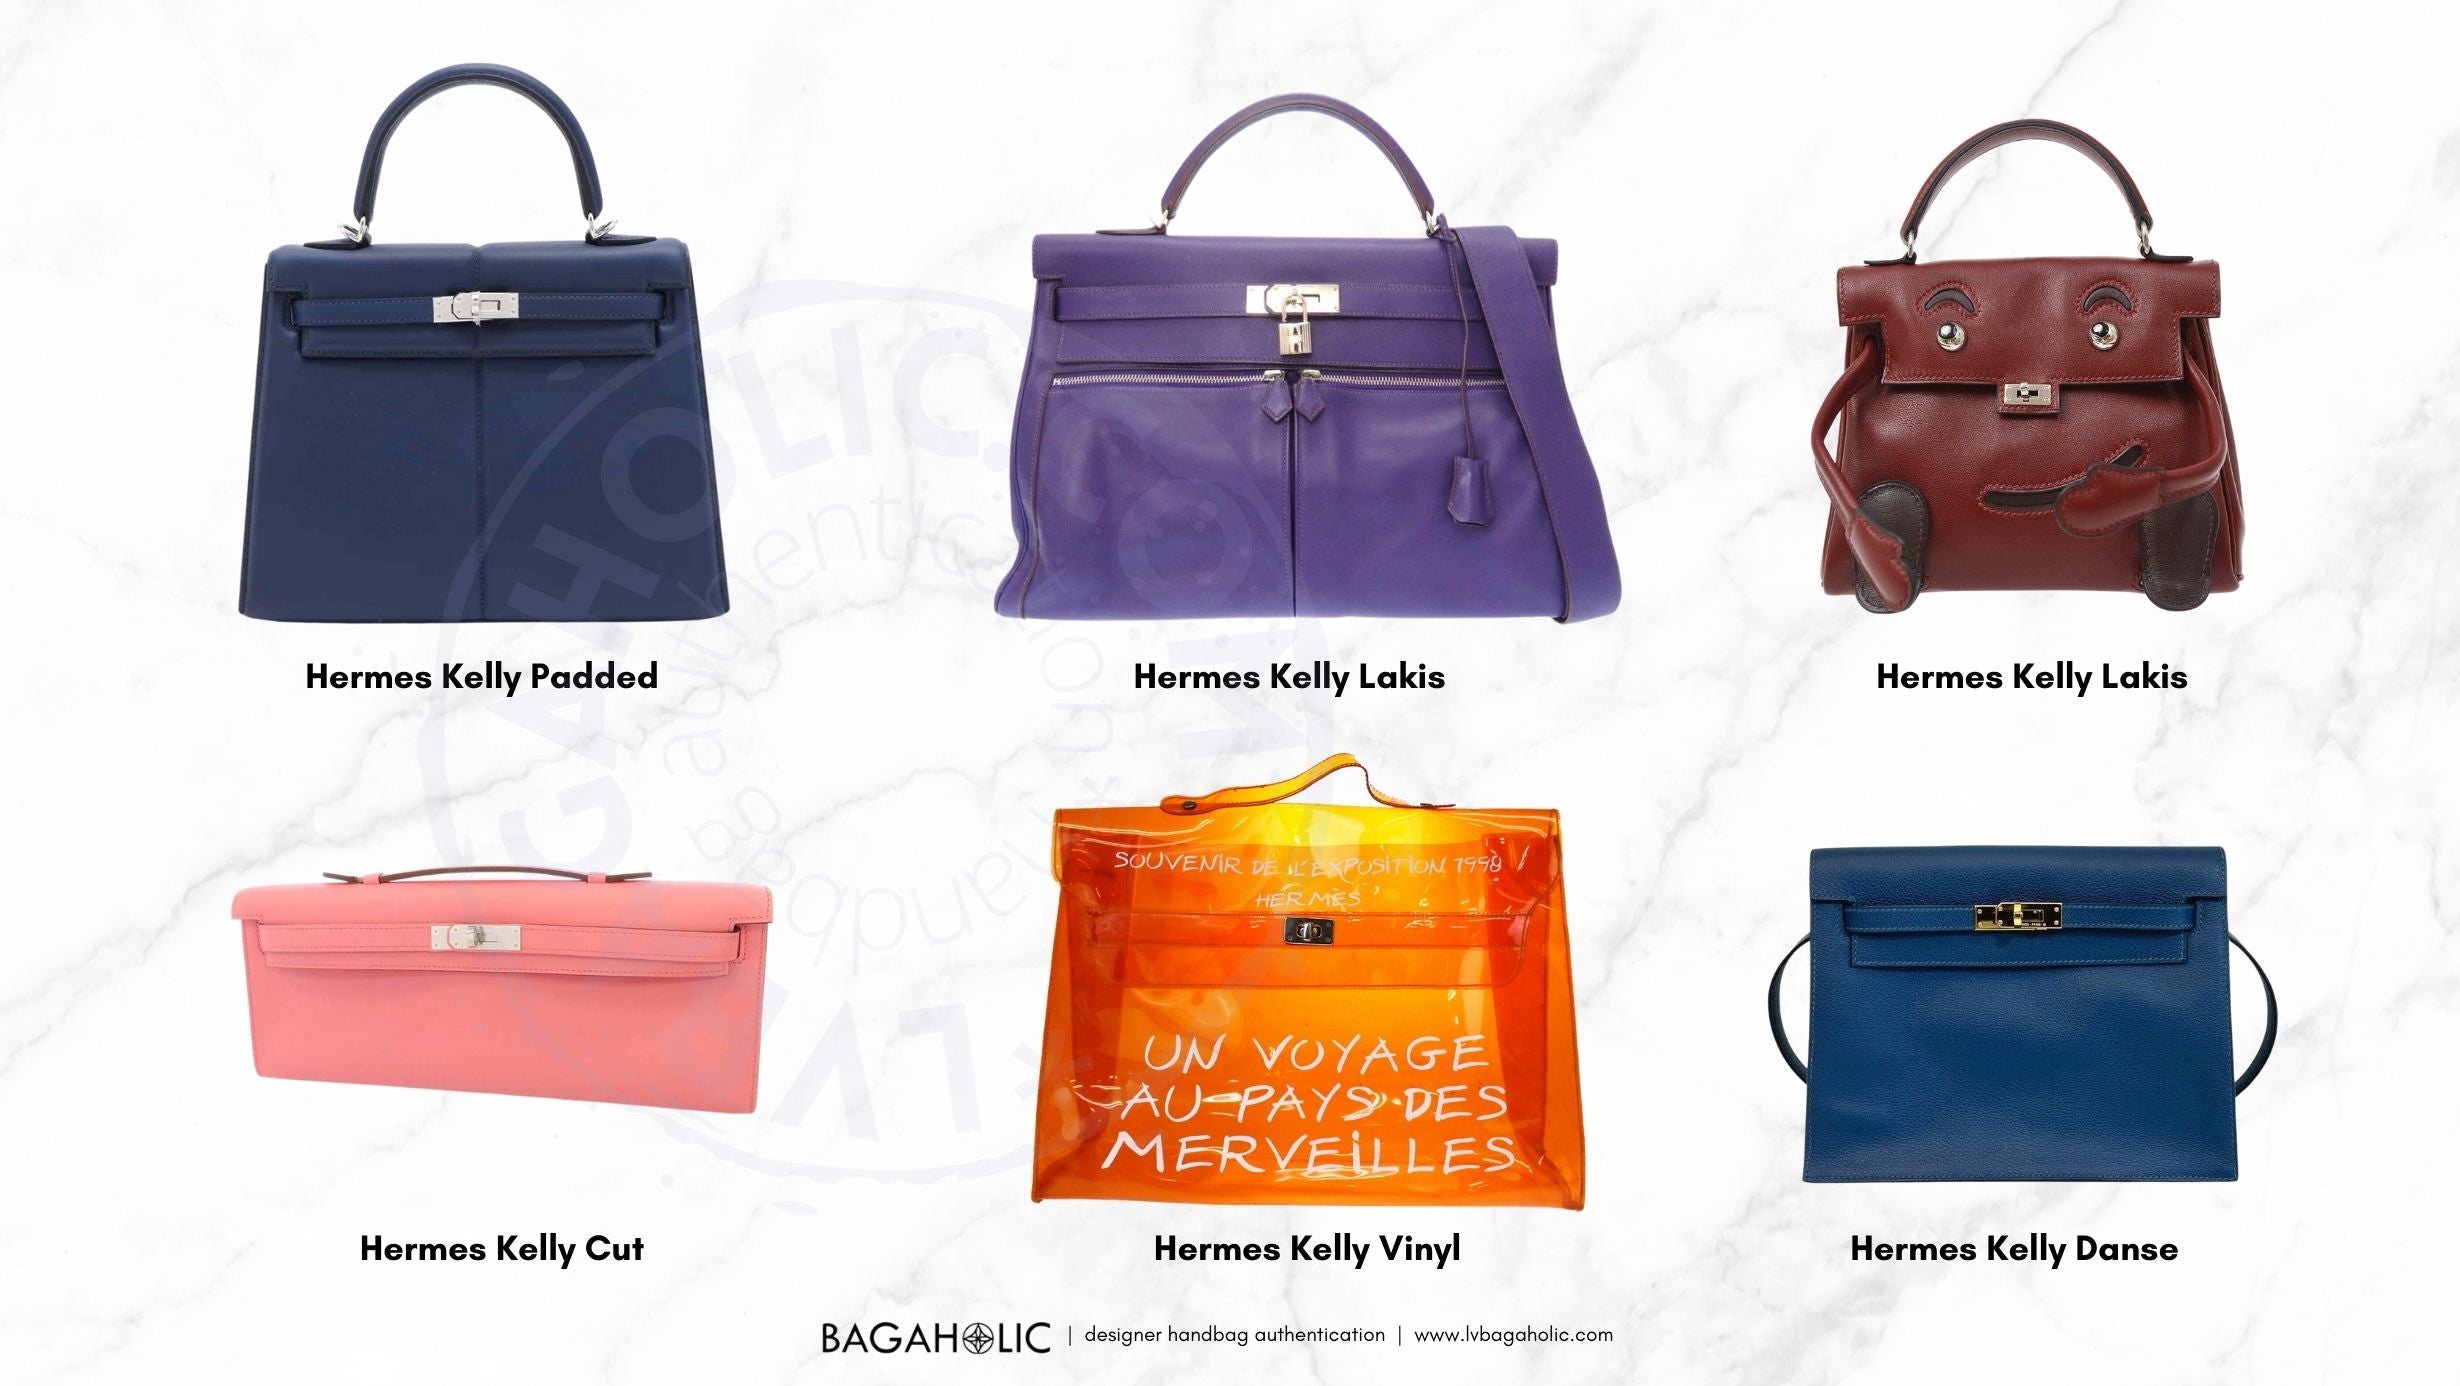 hermes kelly bag sizes,Save up to 19%